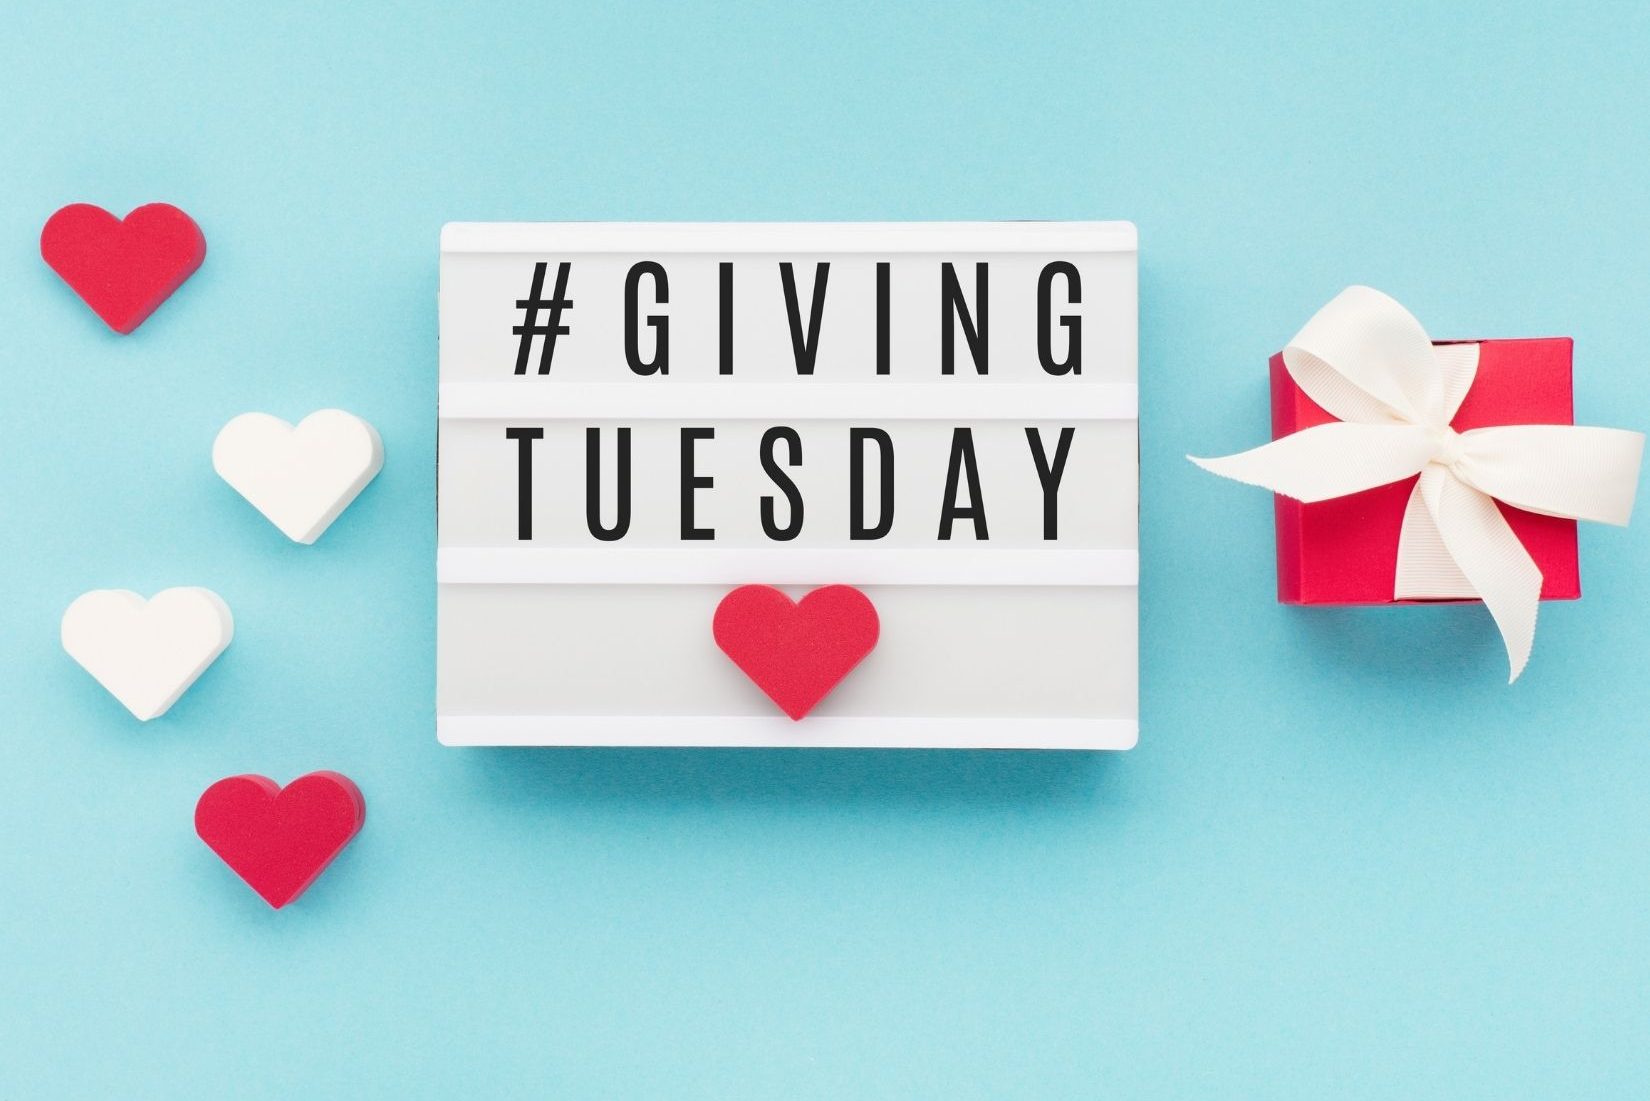 #GivingTuesday on a blue background with red and white hearts.